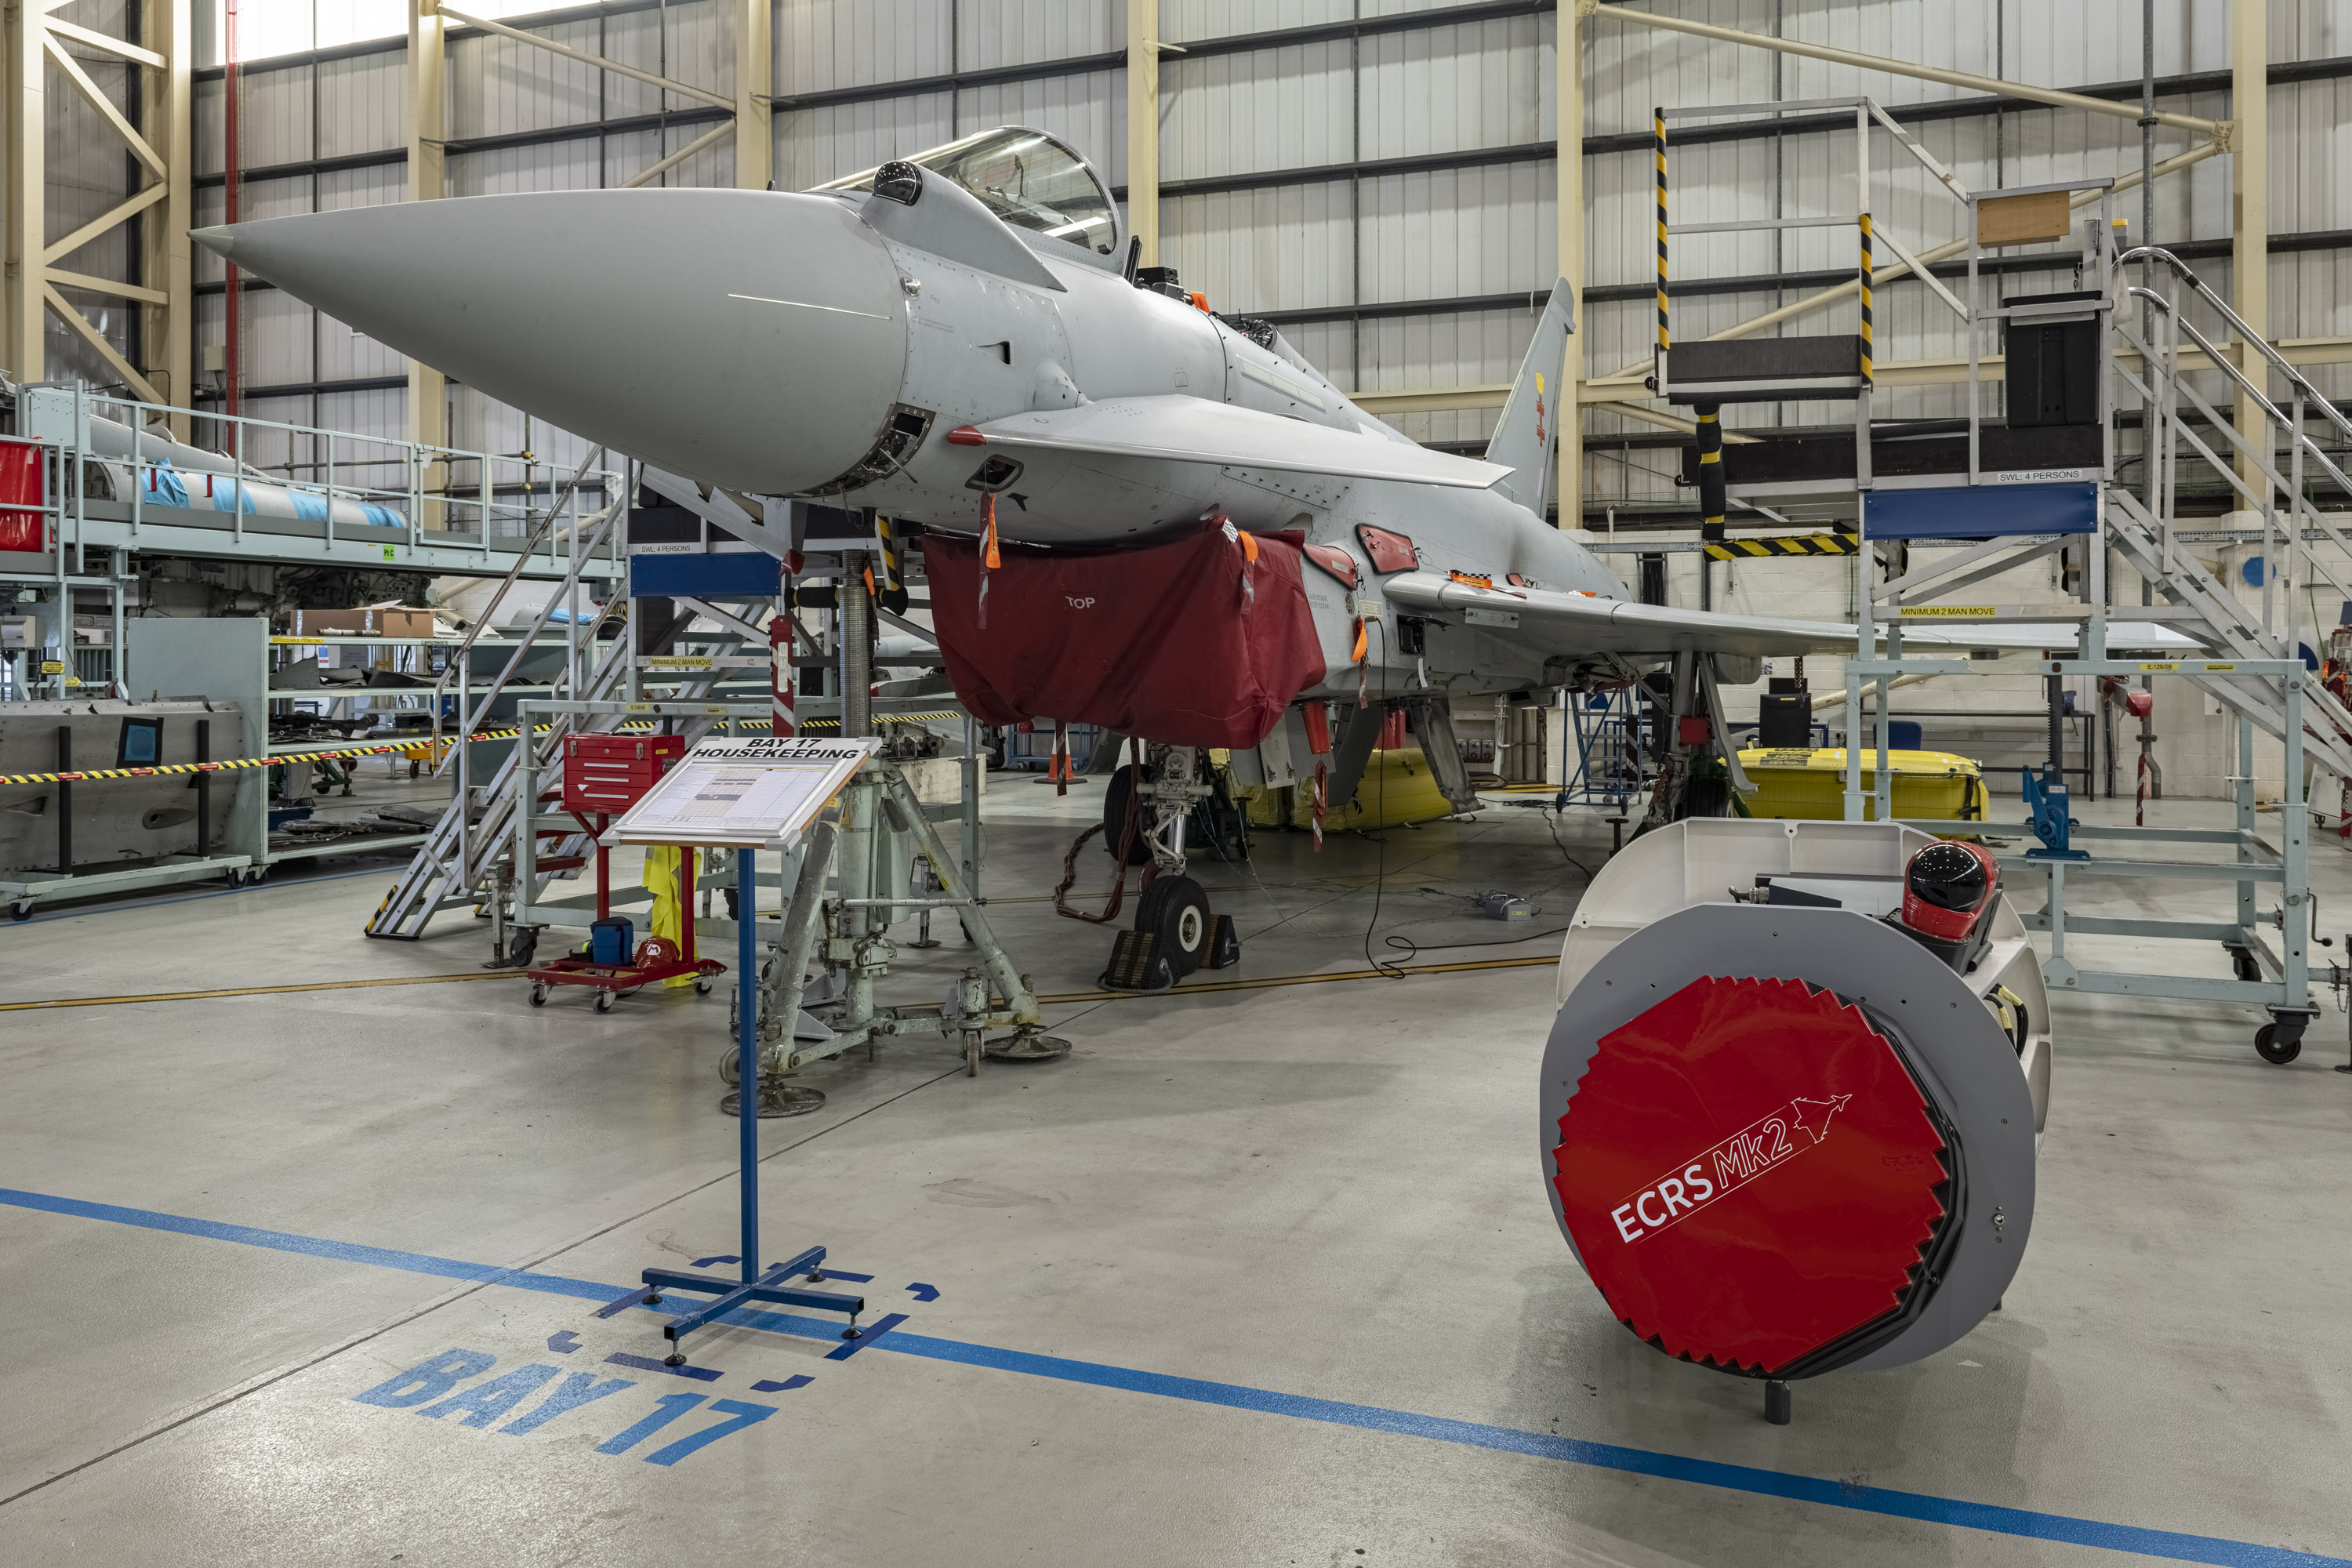 Typhoon in the hangar, ready for maintenance. Radar in the foreground